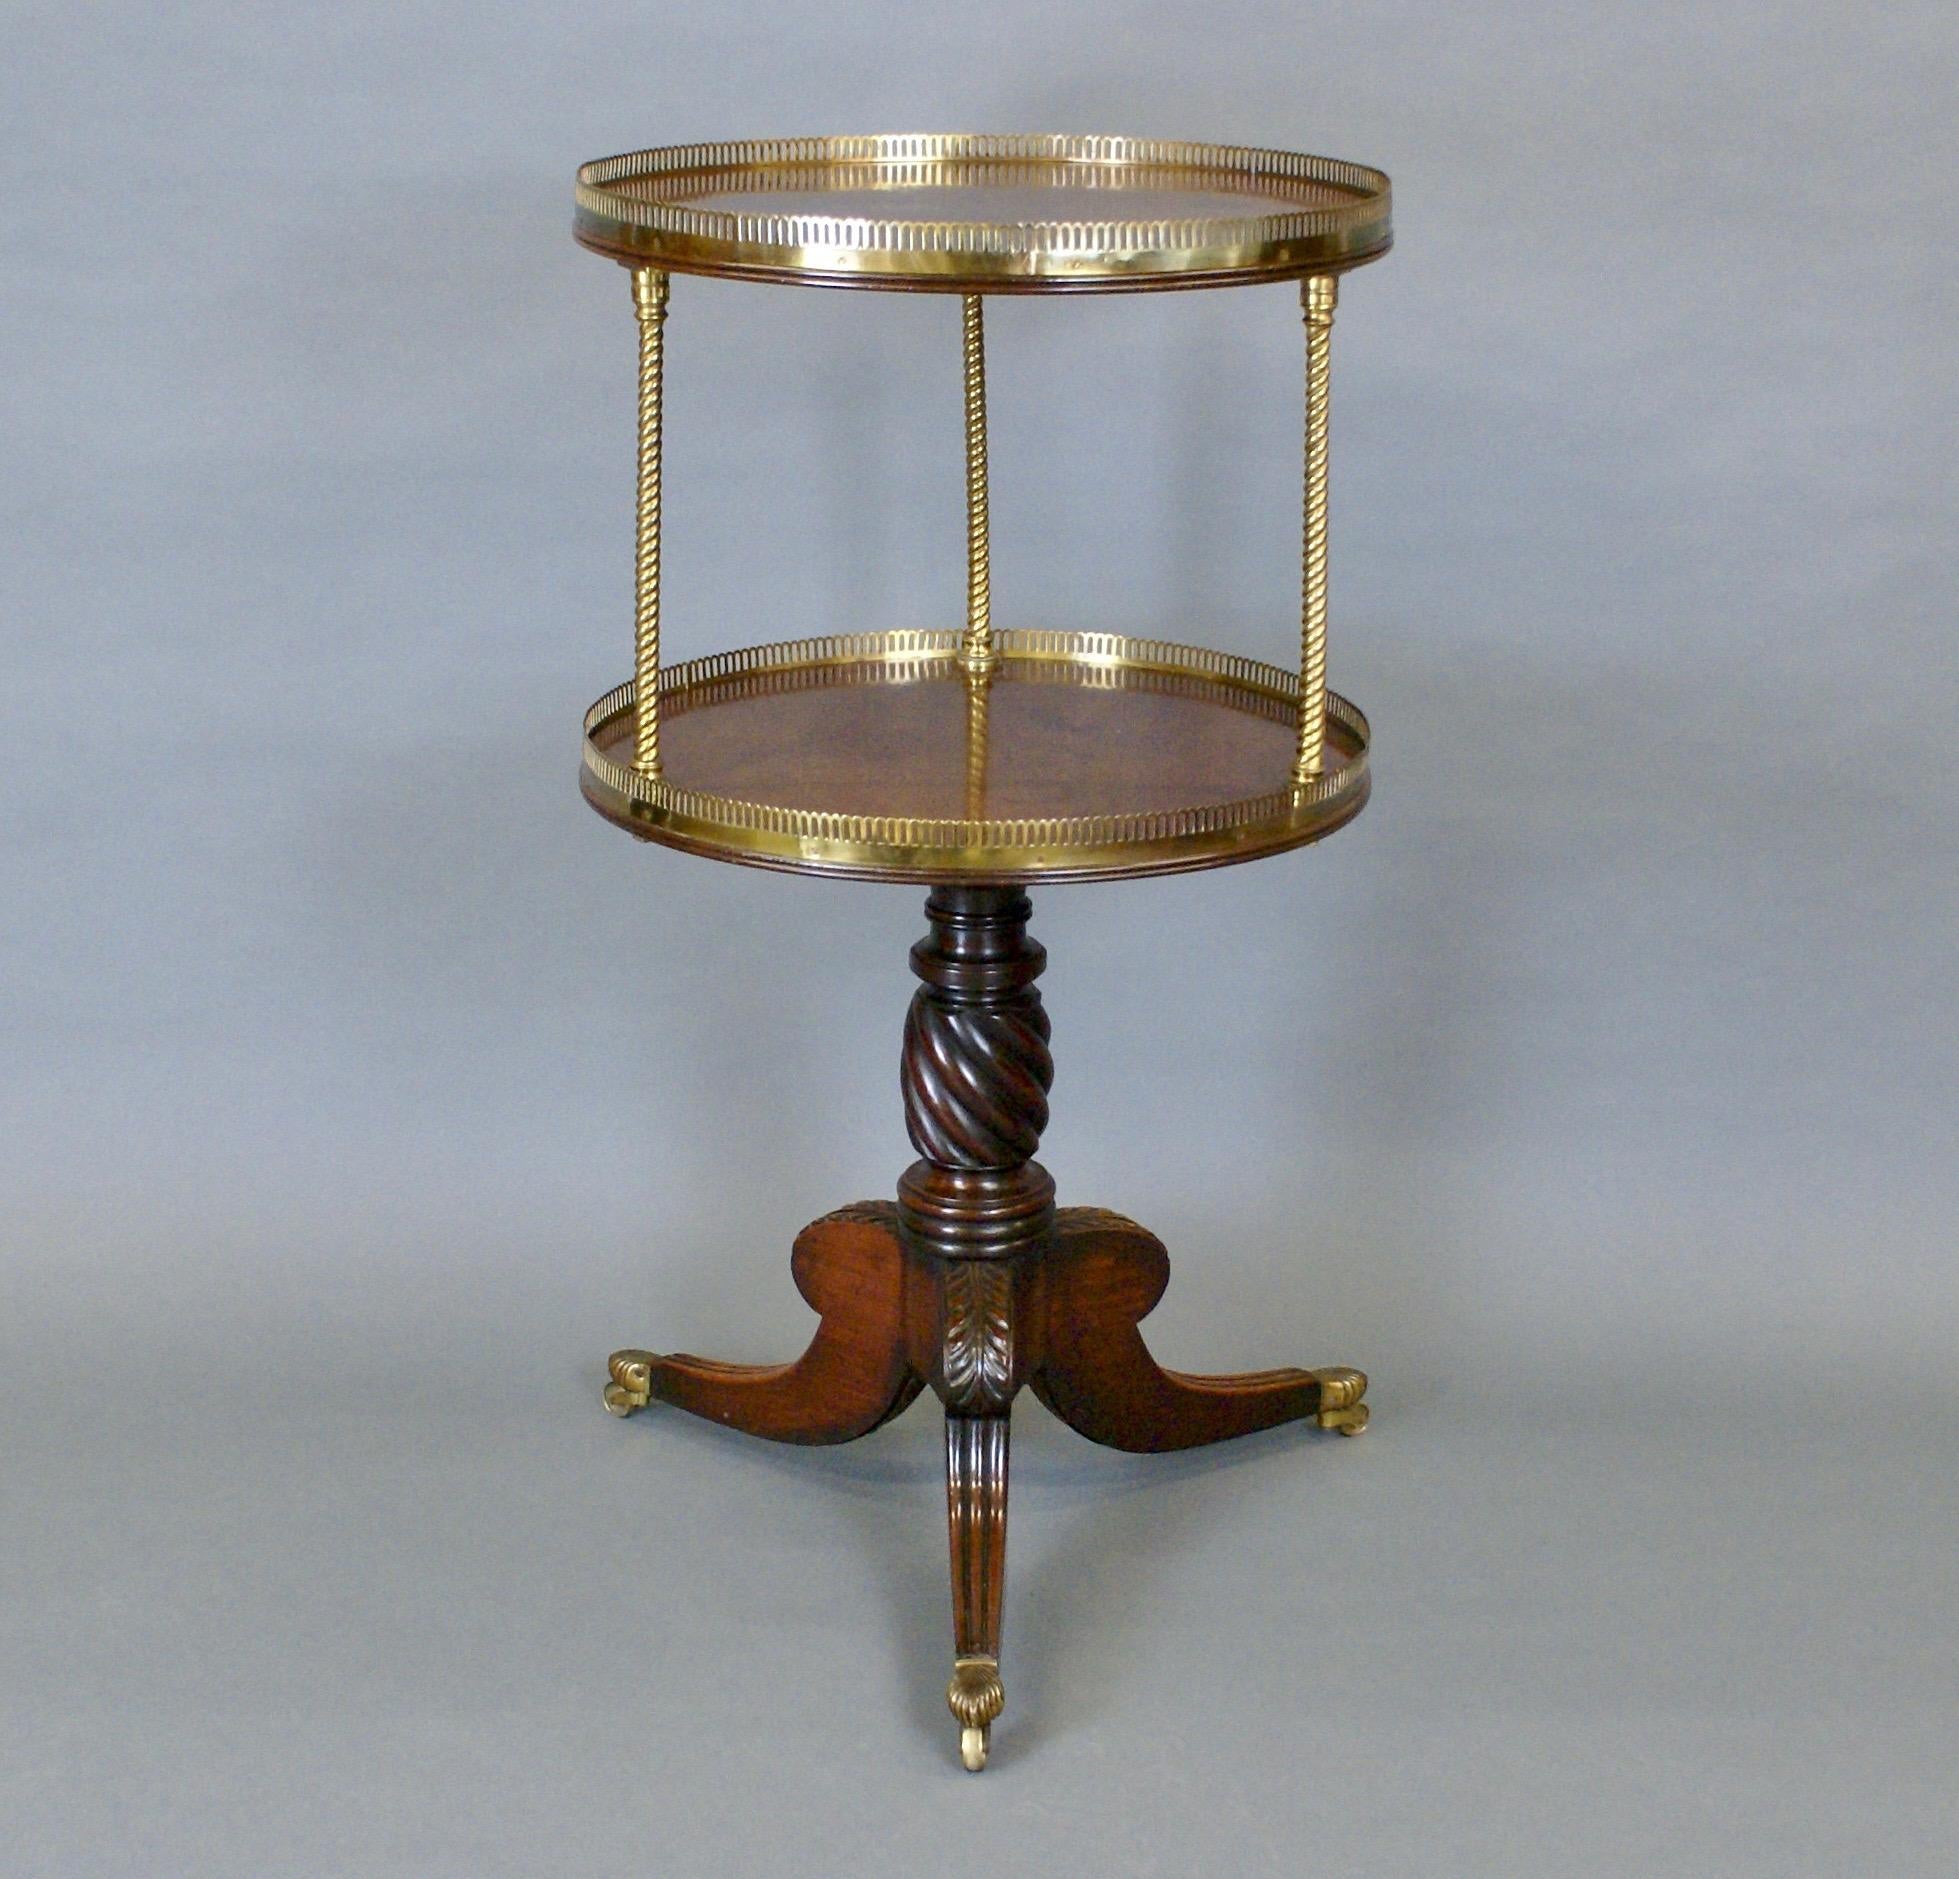 Unusual and Attractive Regency Period Mahogany Dumb Waiter In Good Condition For Sale In South Croydon, GB